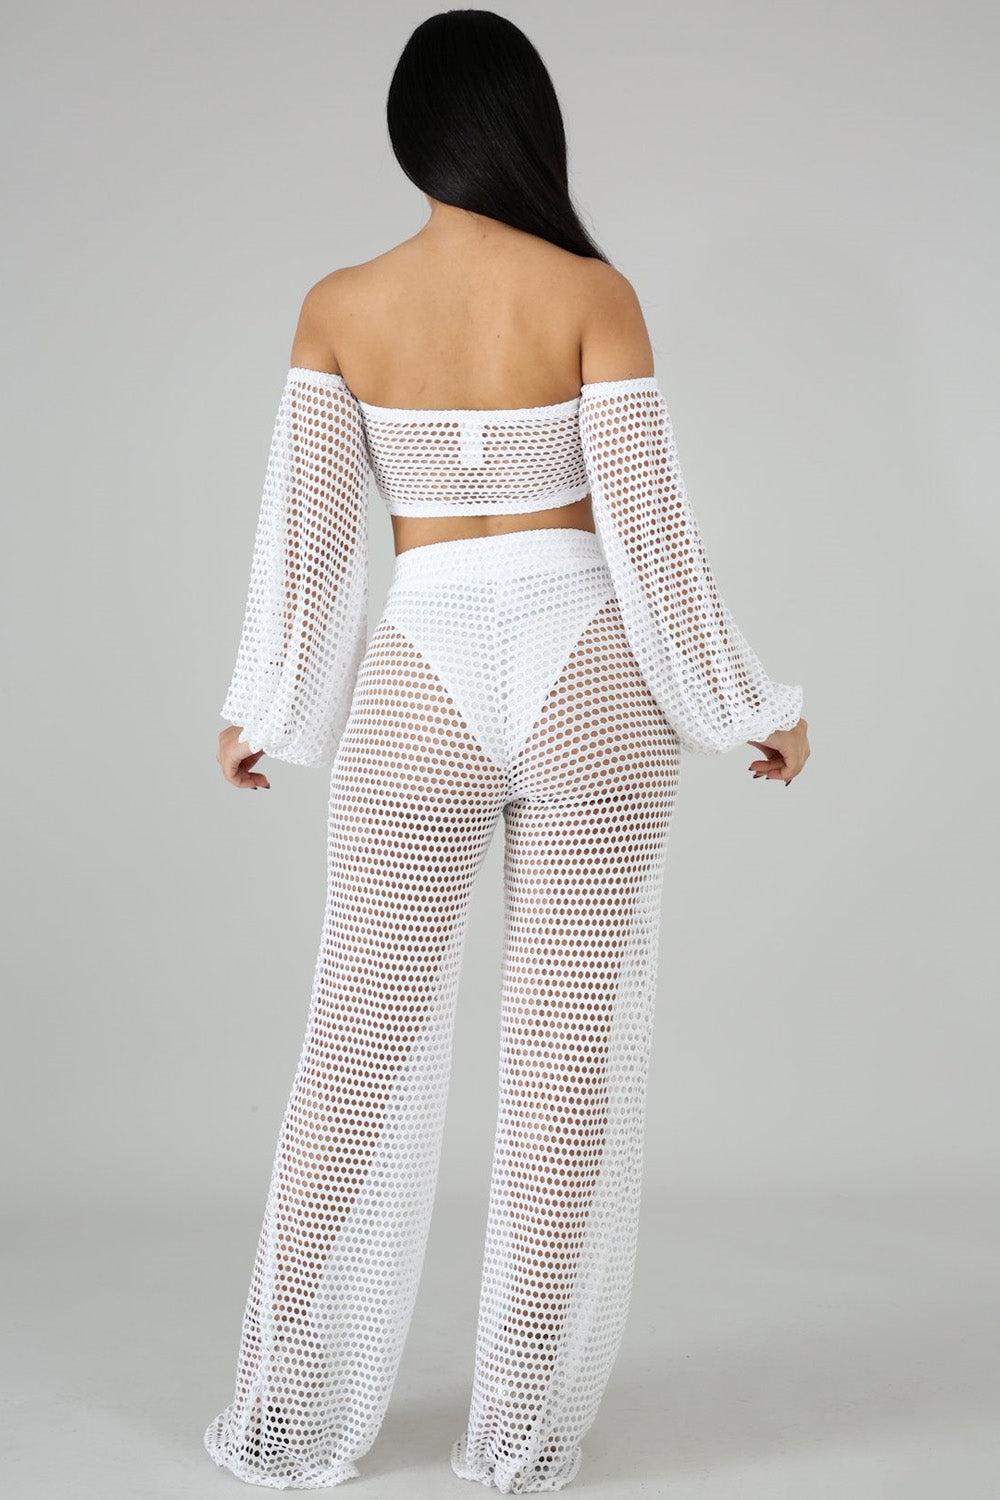 goPals white 2-piece mesh set with tie front top and wide leg pants.